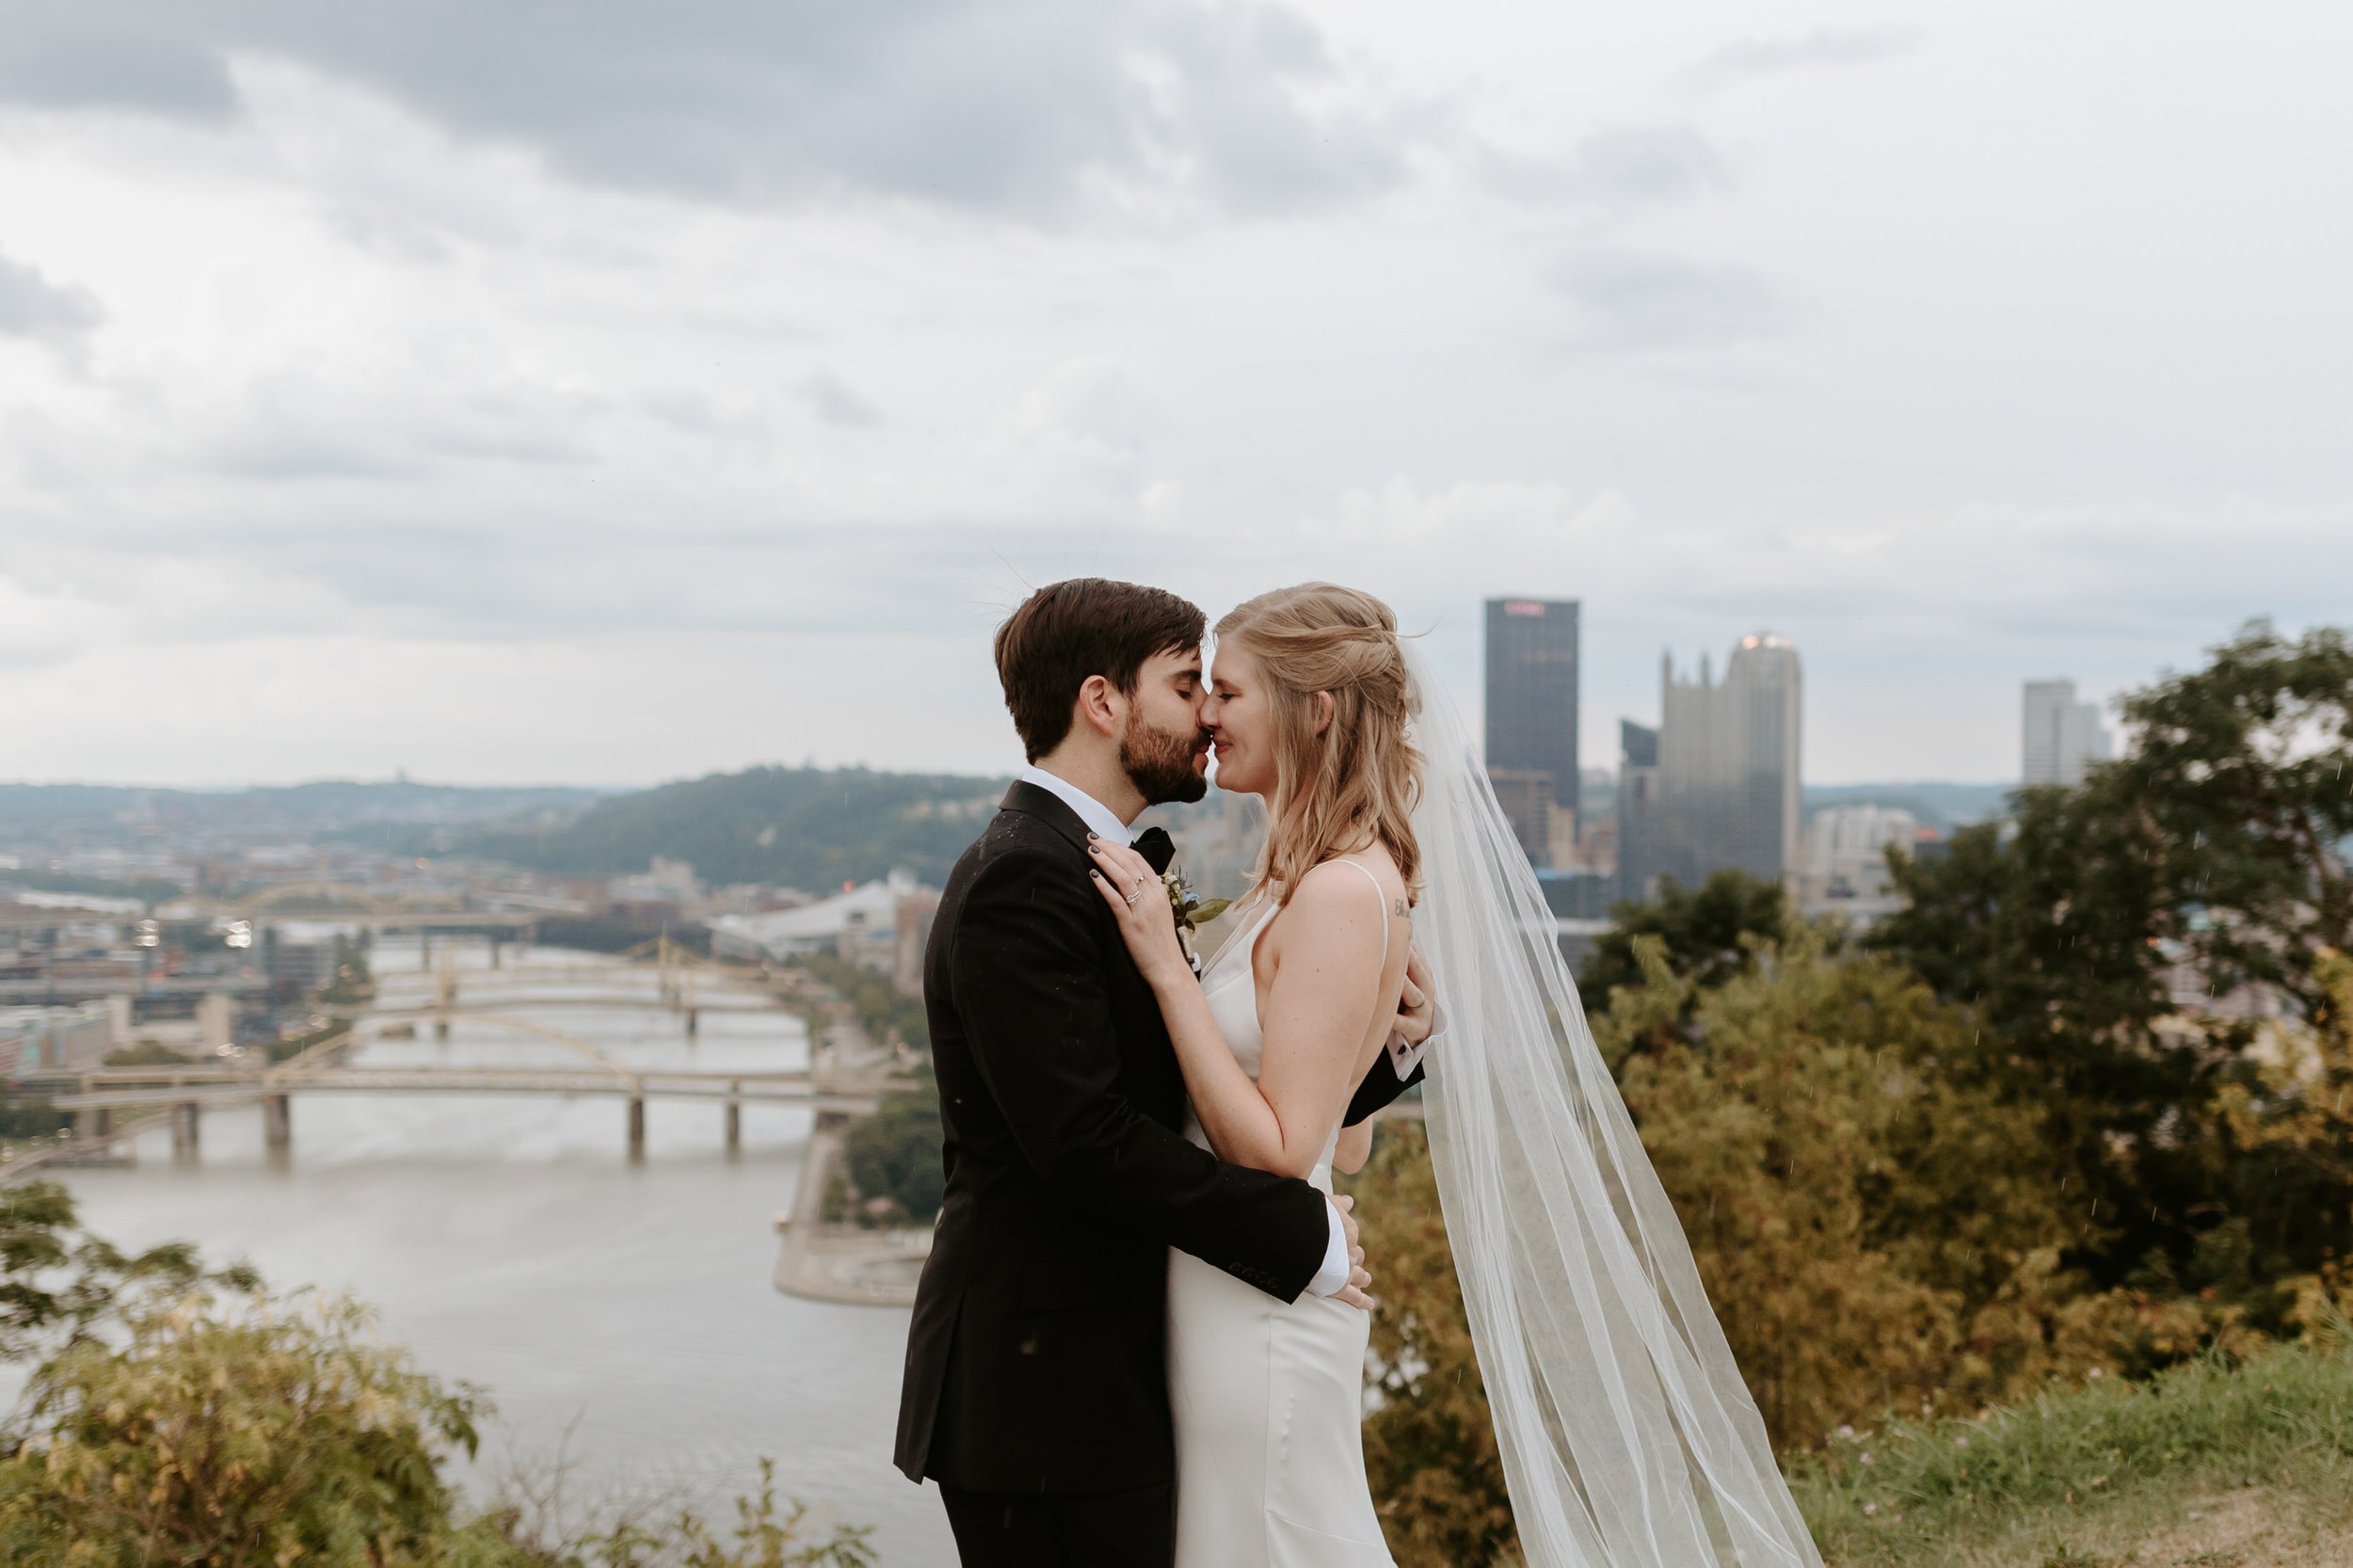 Bride and groom face each other with city skyline in the background.